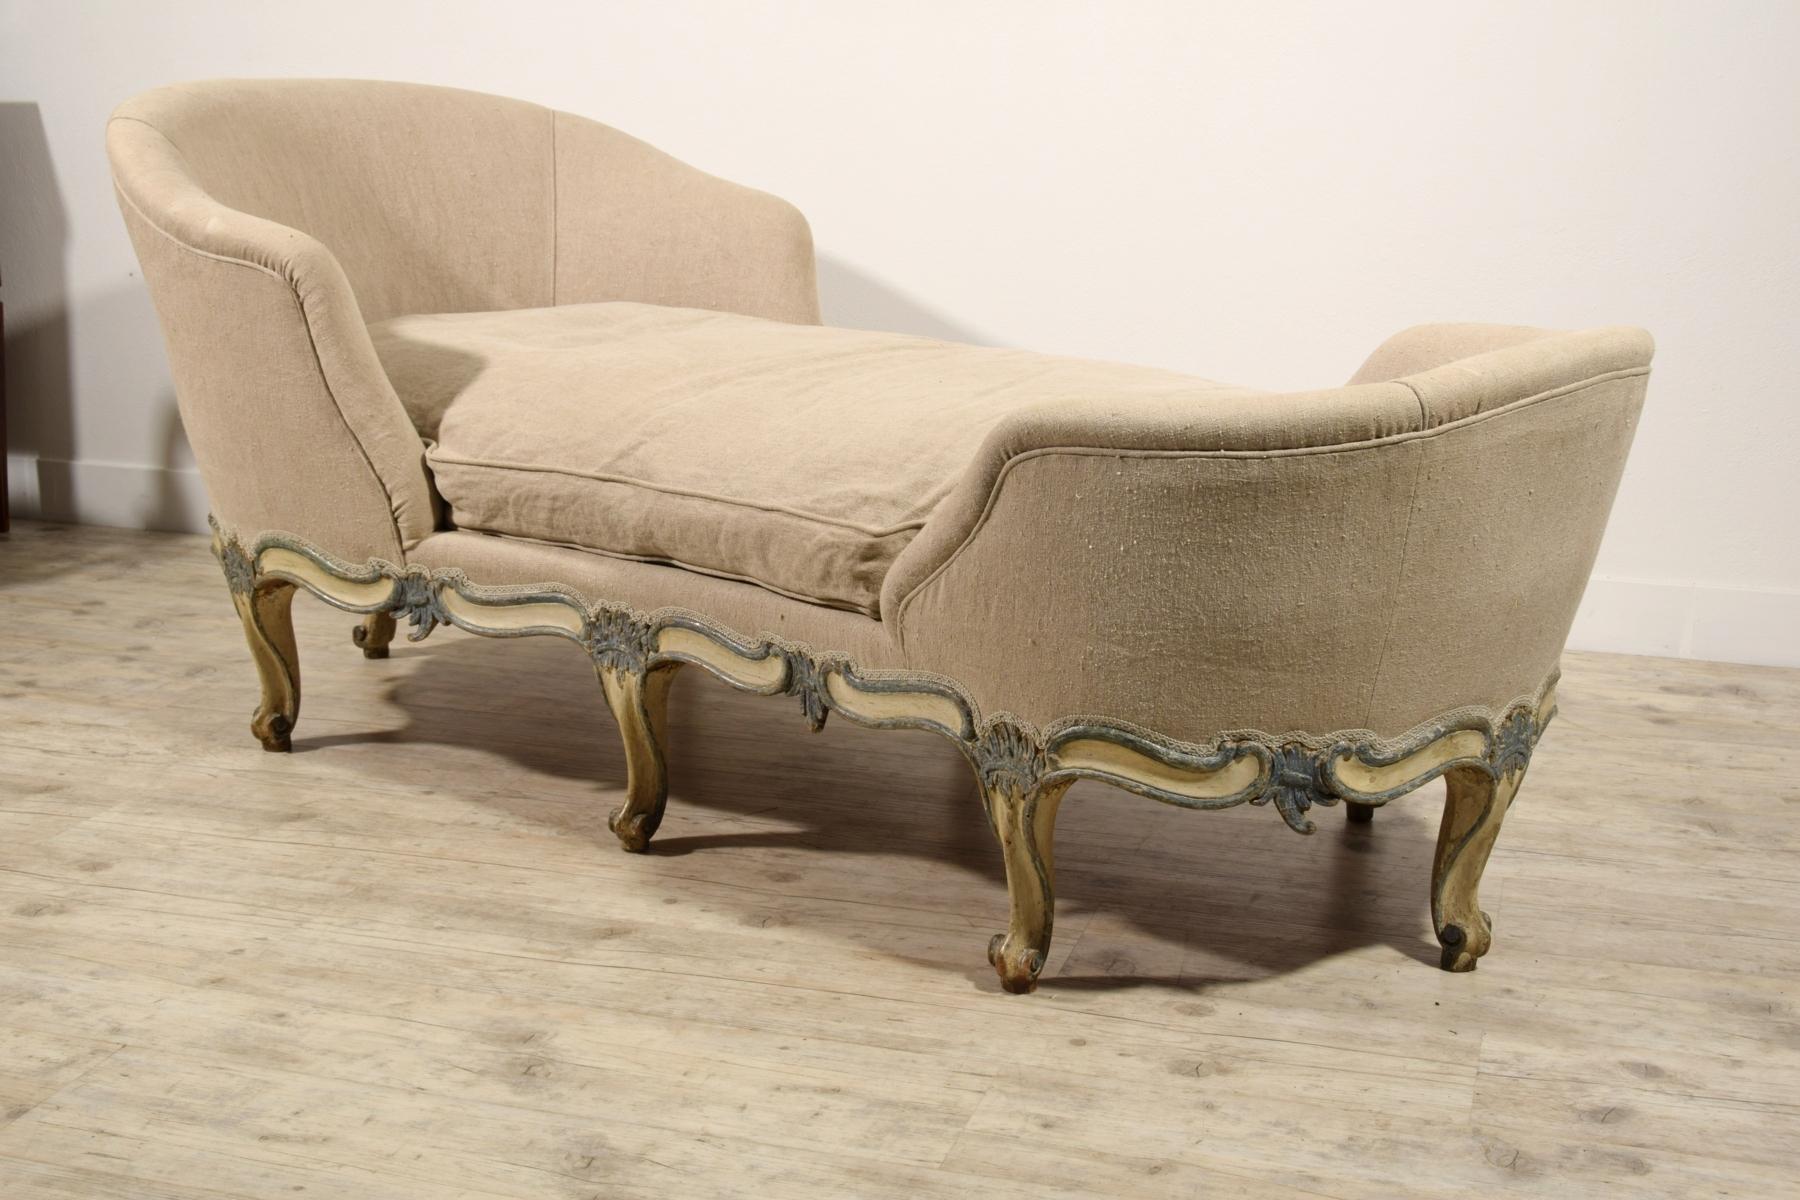 18th Century, Italian Baroque Carved and Lacquered Wood Chaise Longue  3